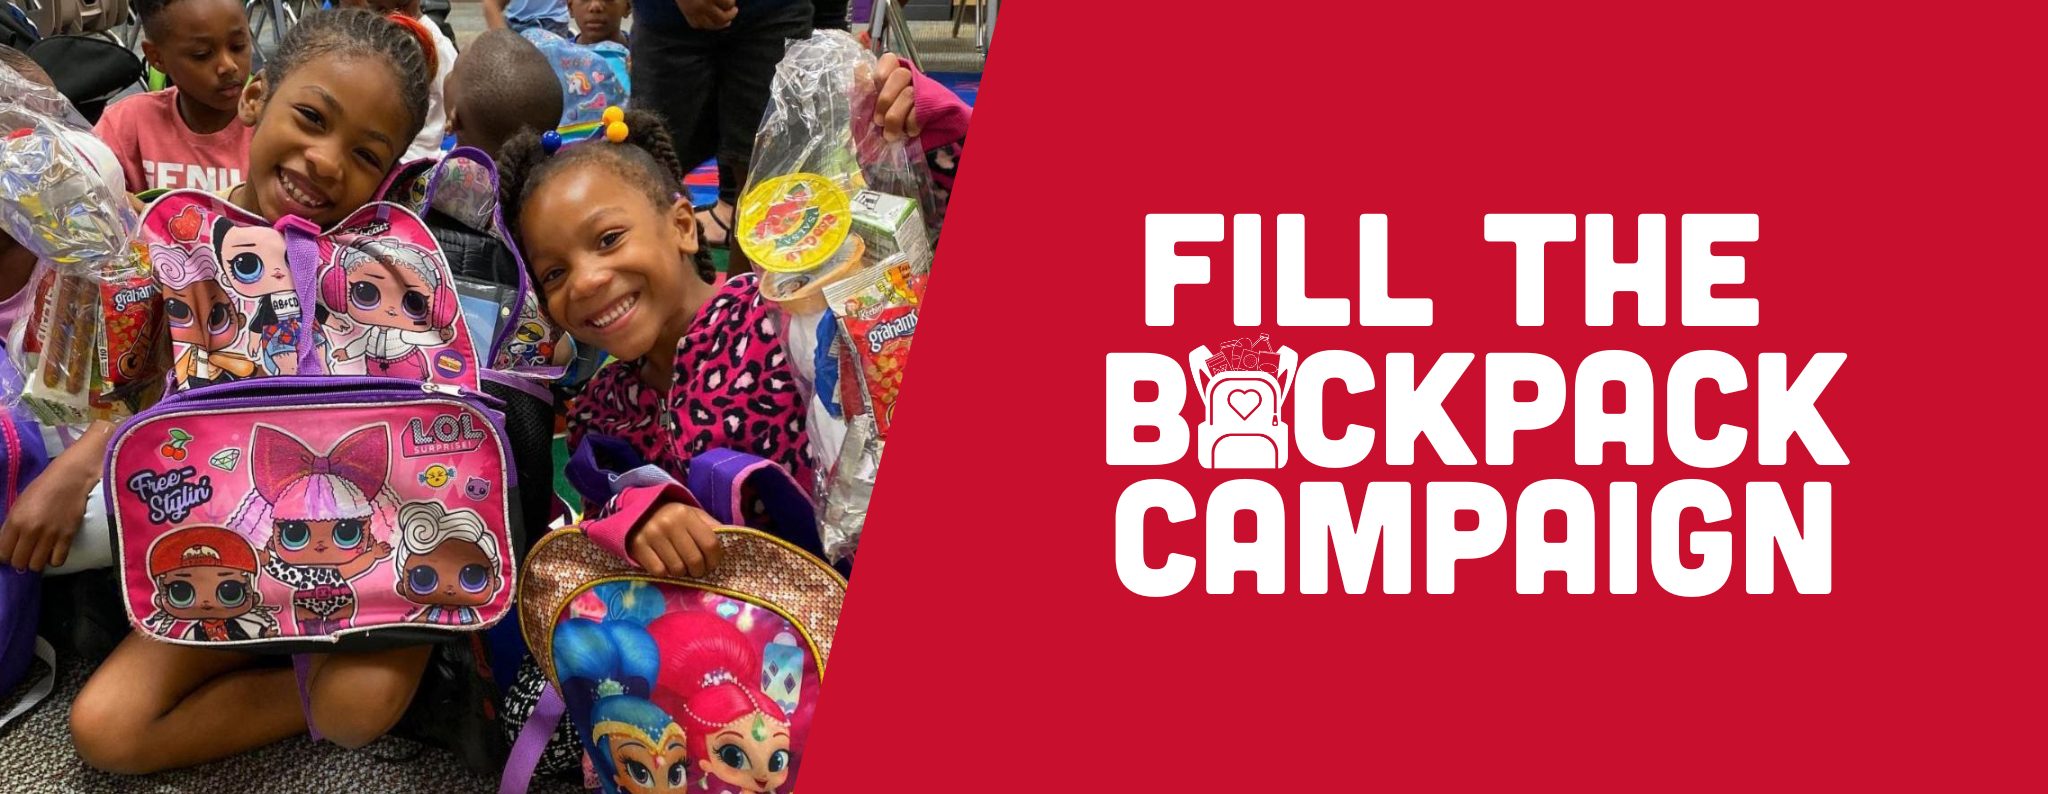 Fill the Backpack Campaigns